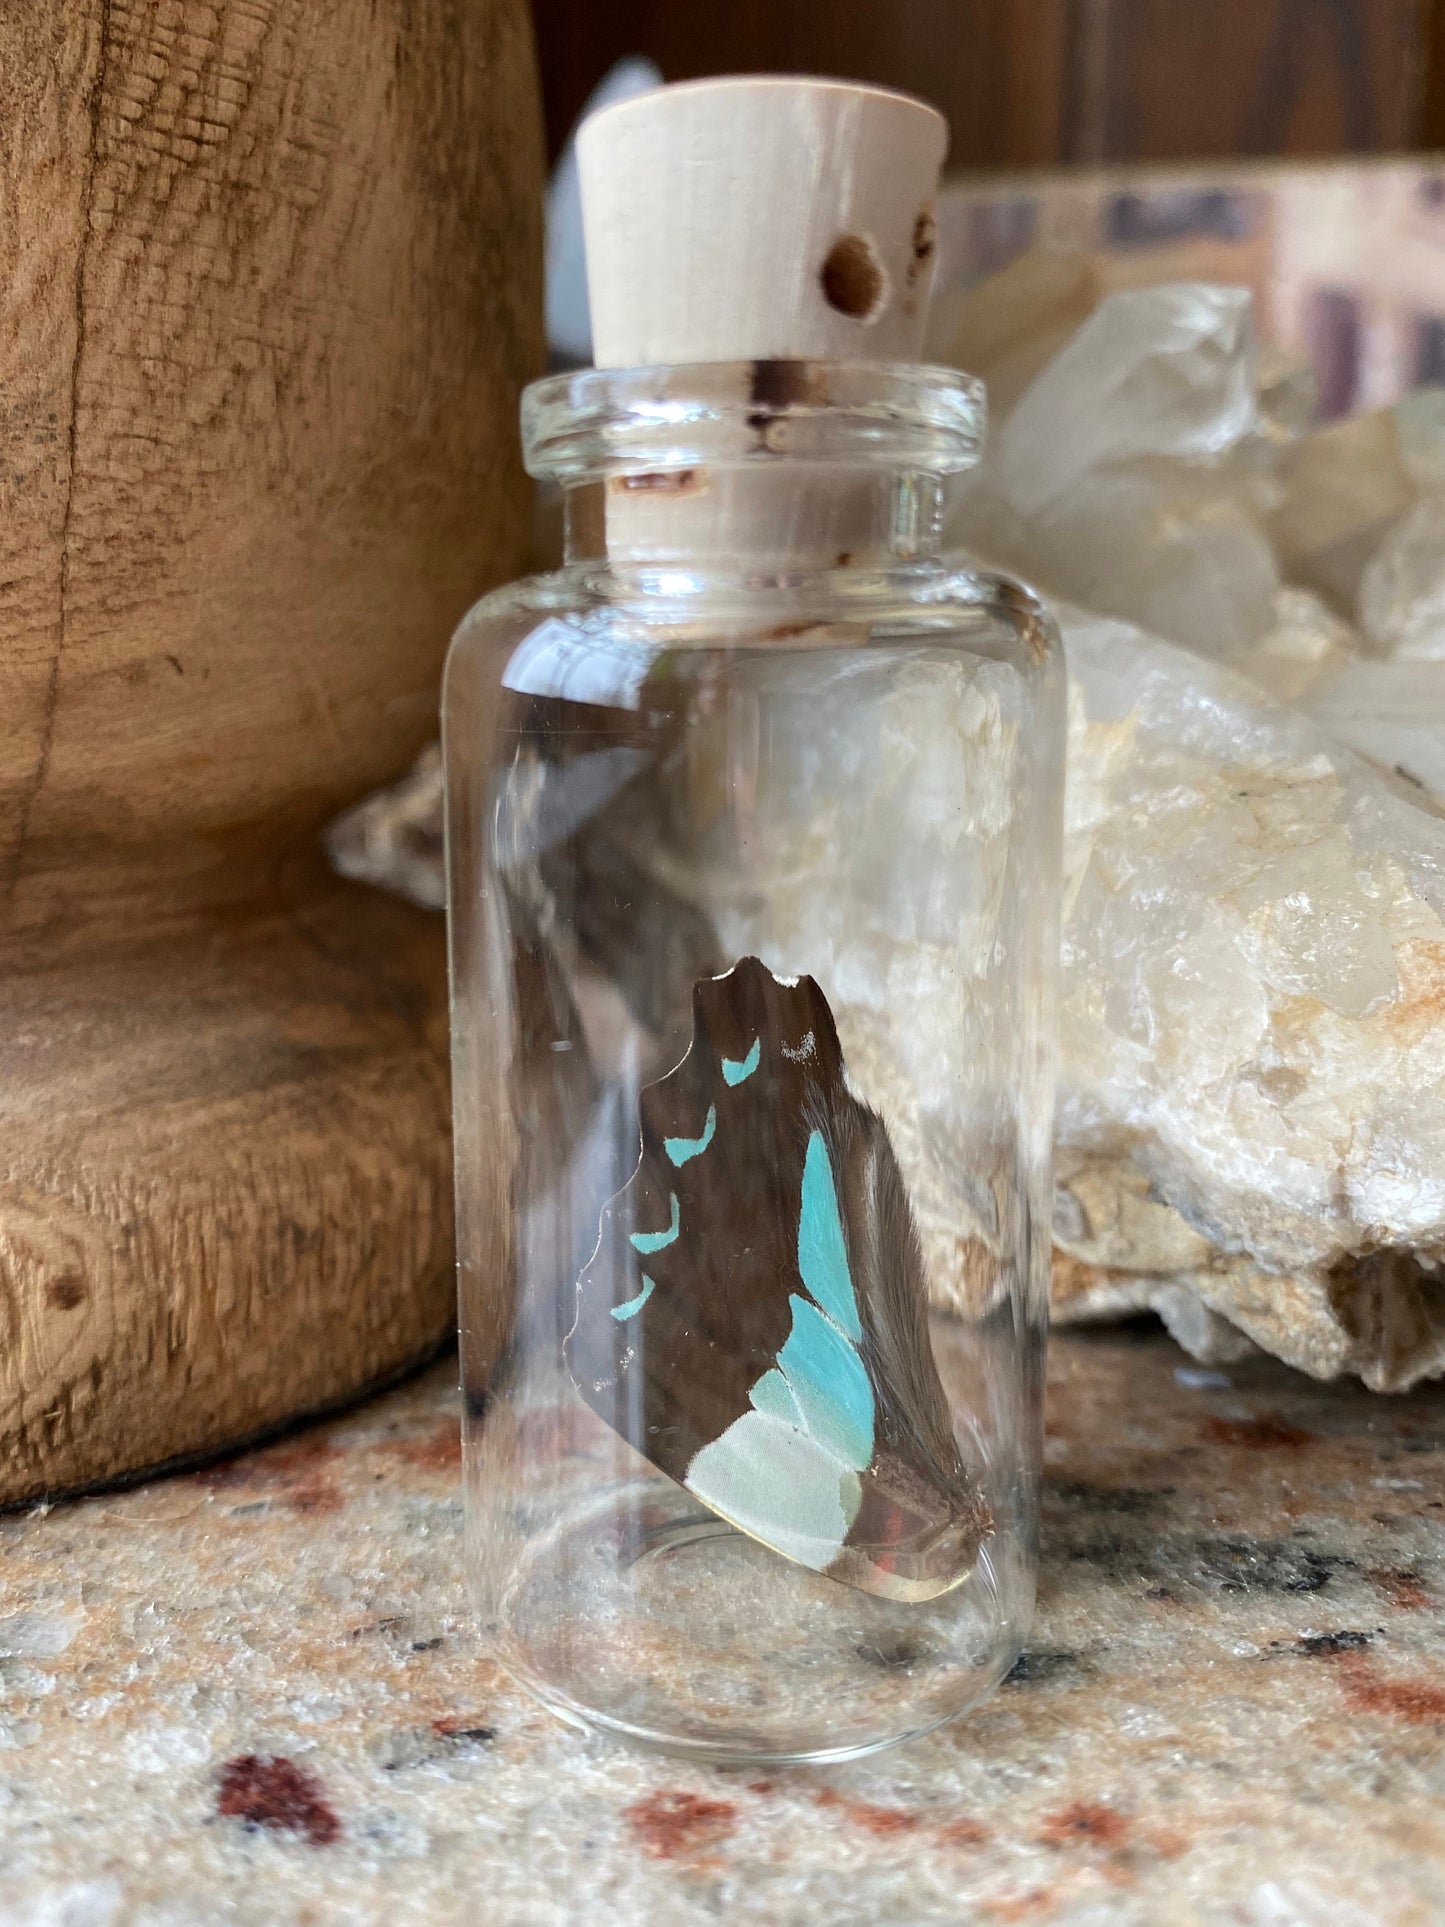 Medium Butterfly Wing Specimen Jar From and For Conservation